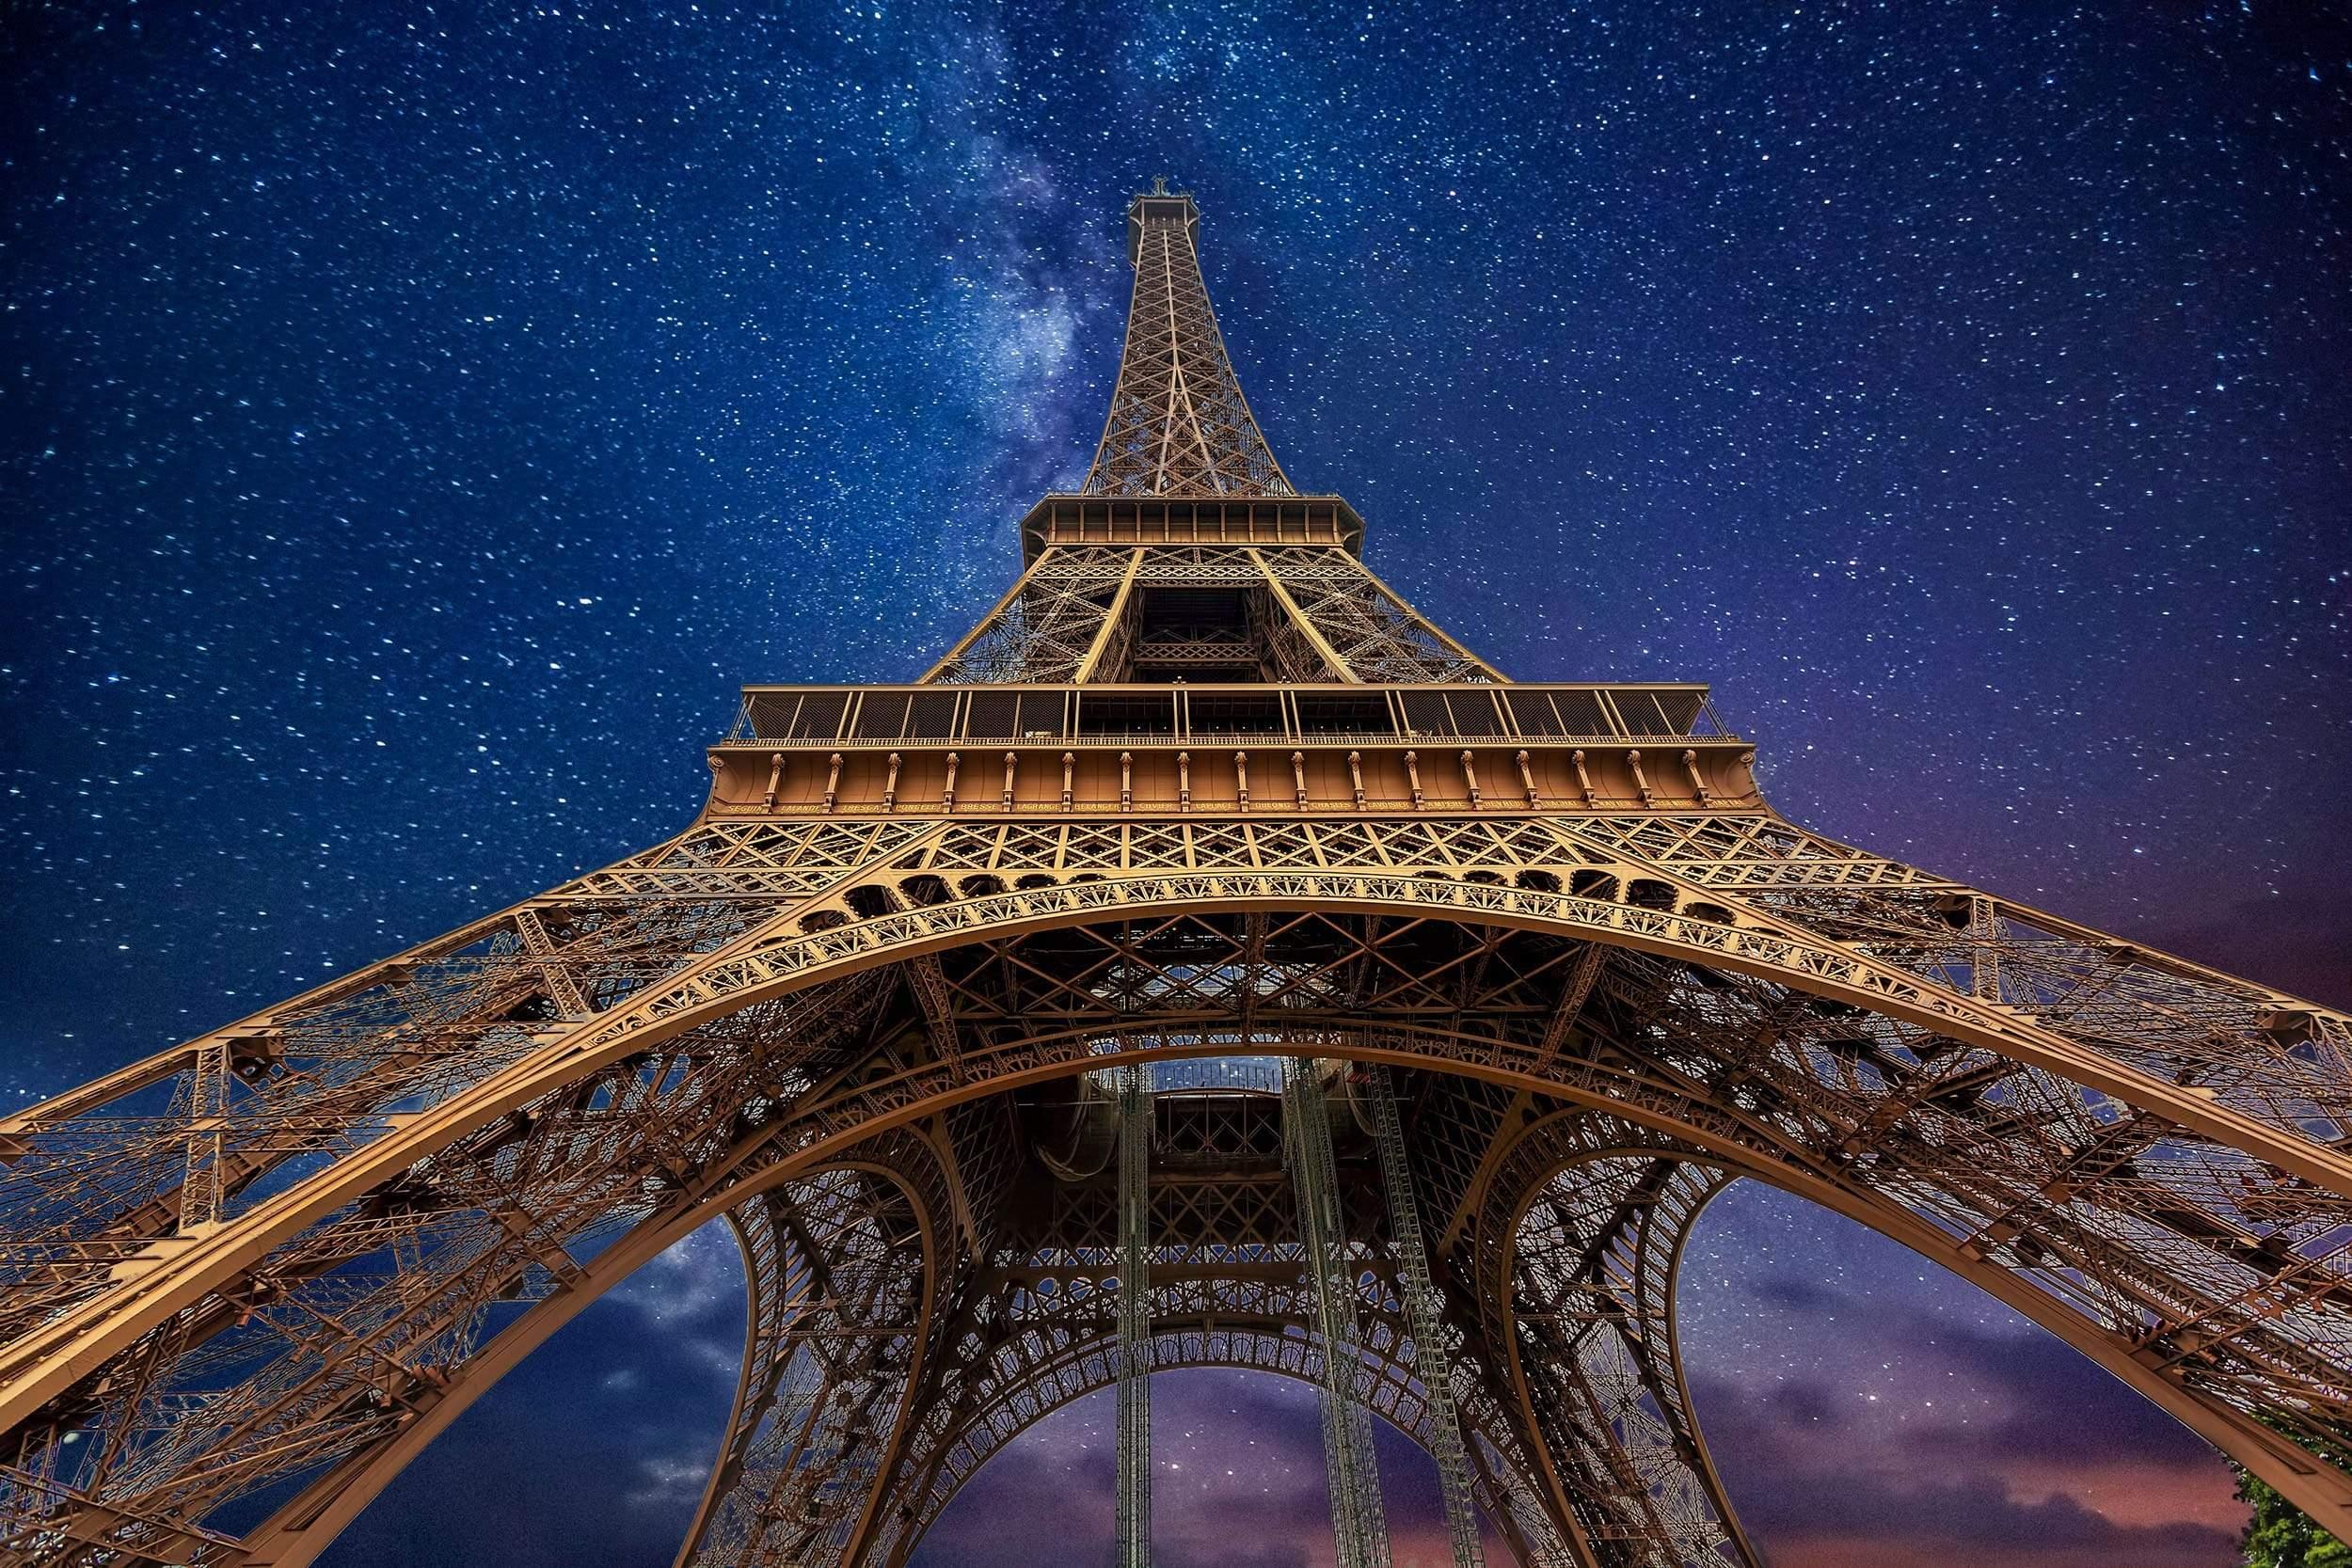 Eiffel Tower at Night looking up